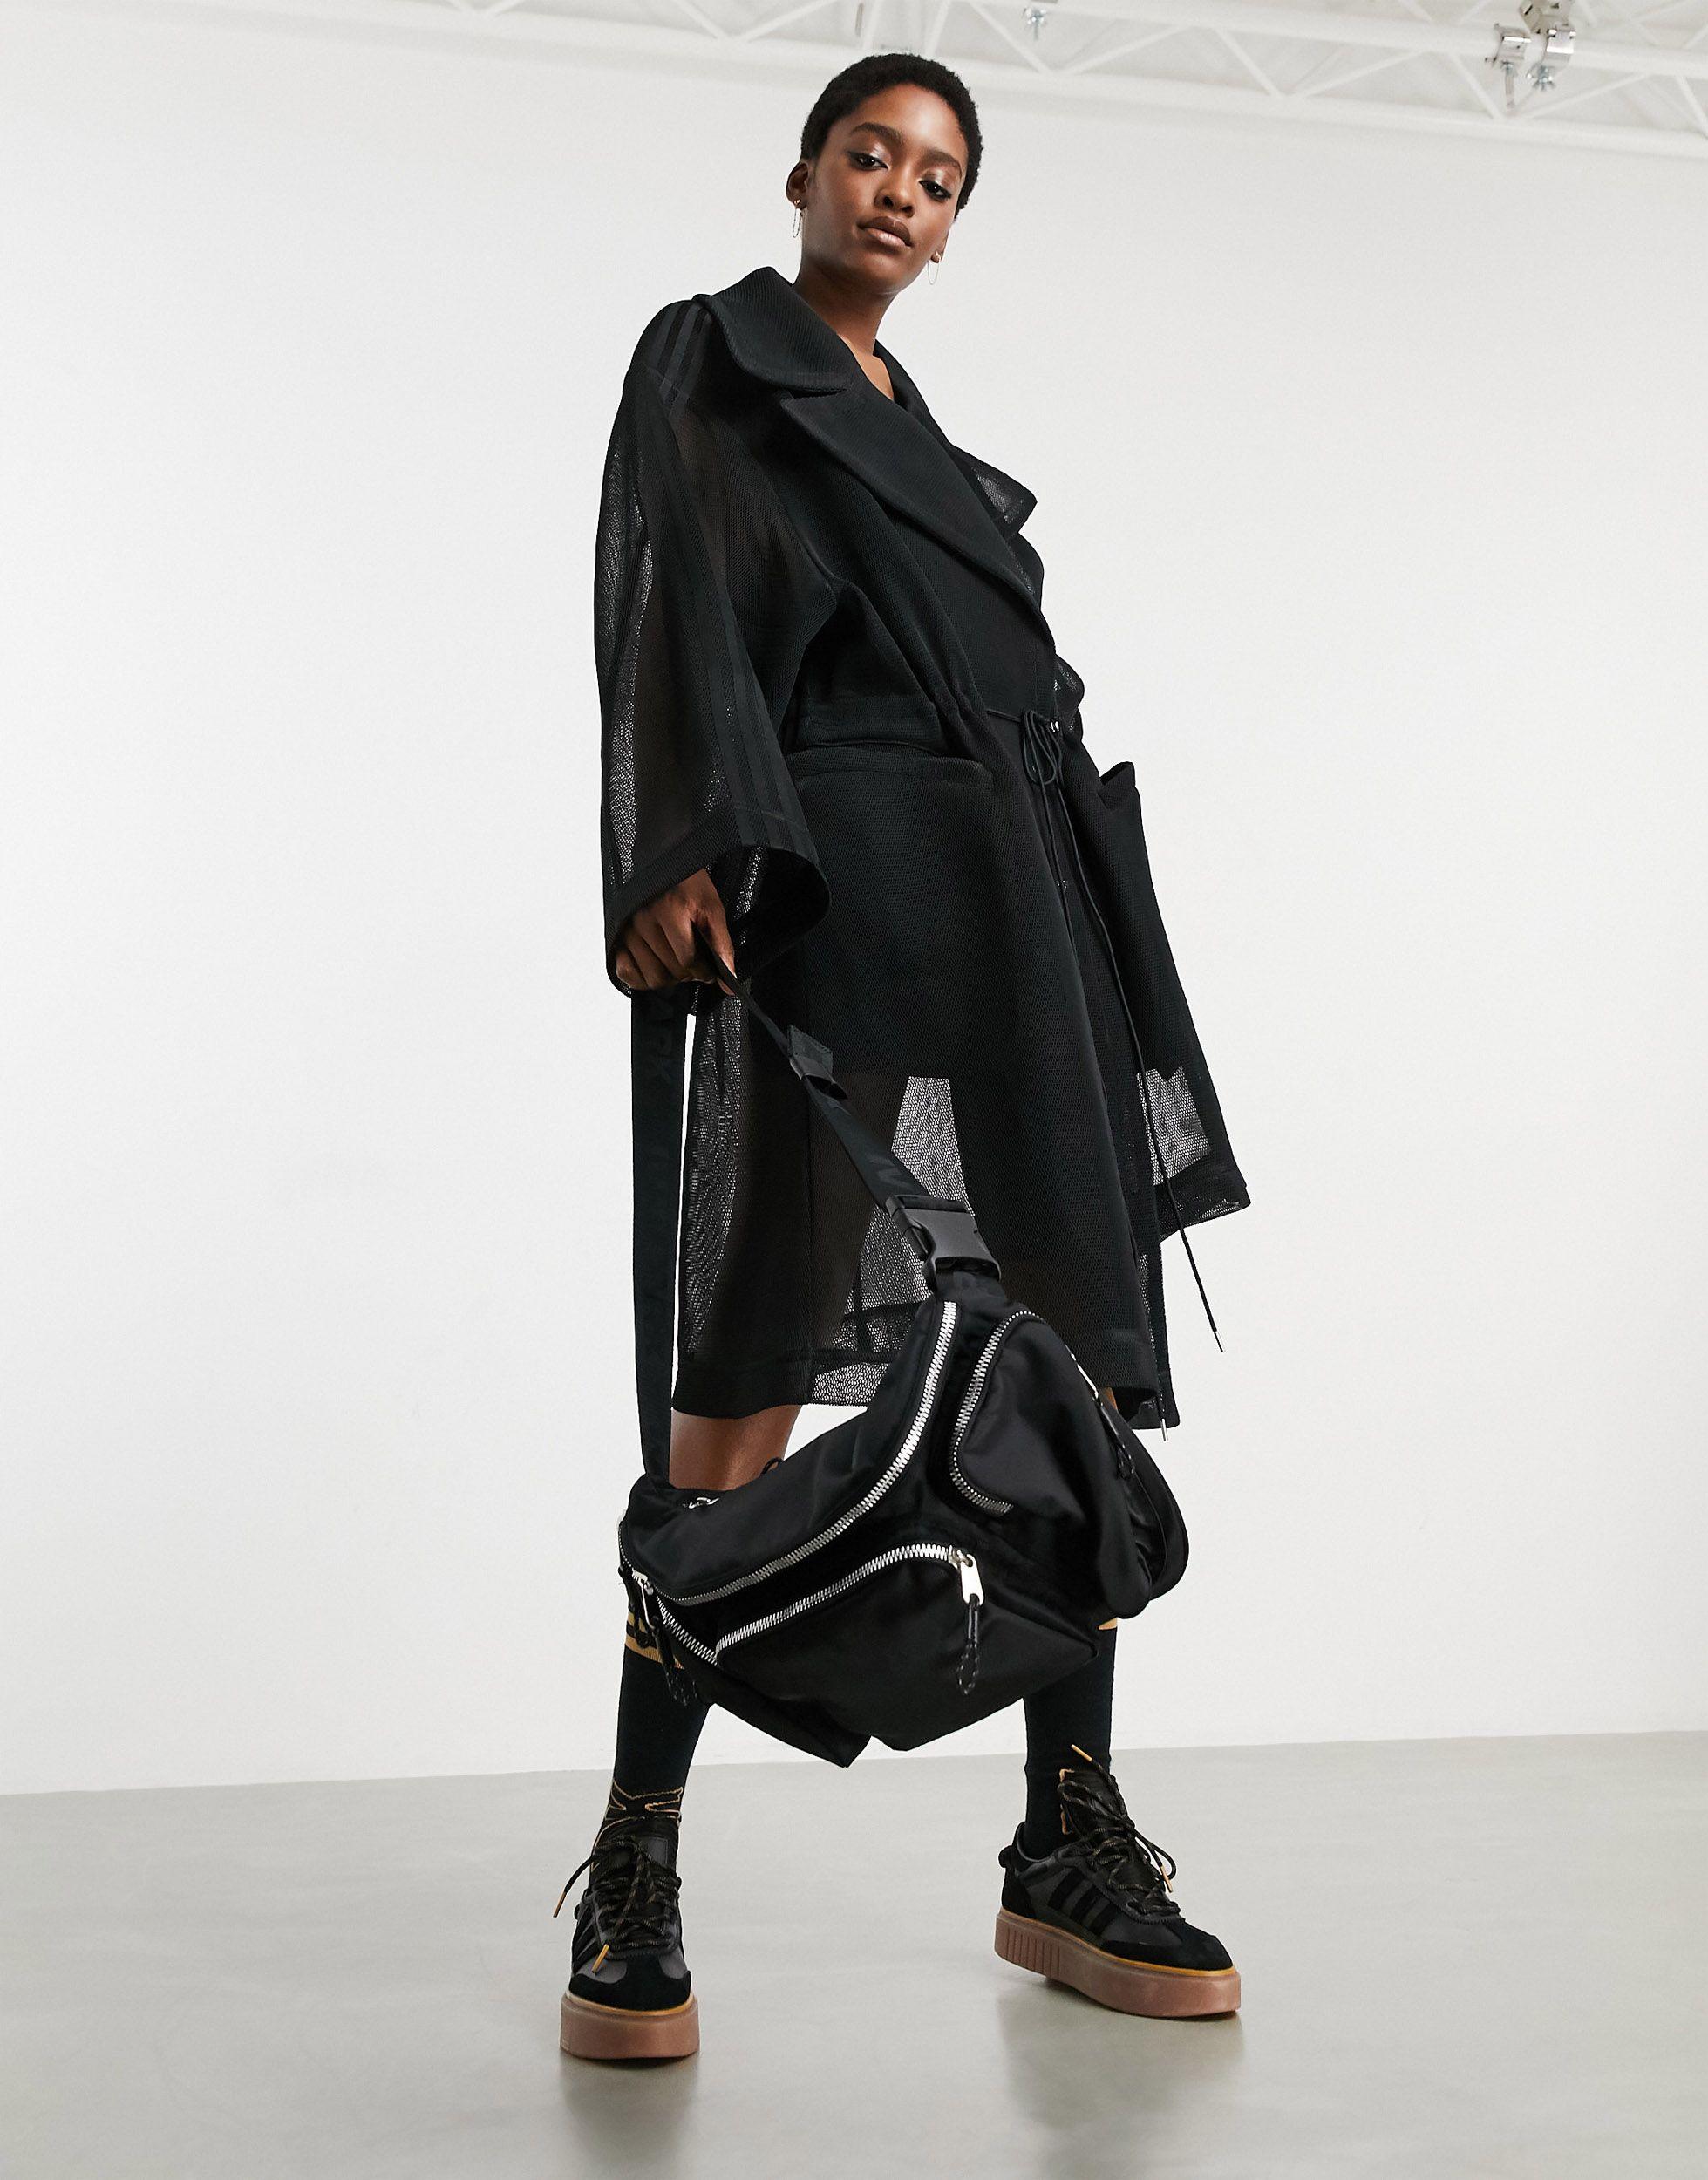 Ivy Park Adidas X Mesh Trench Coat in Black | Lyst